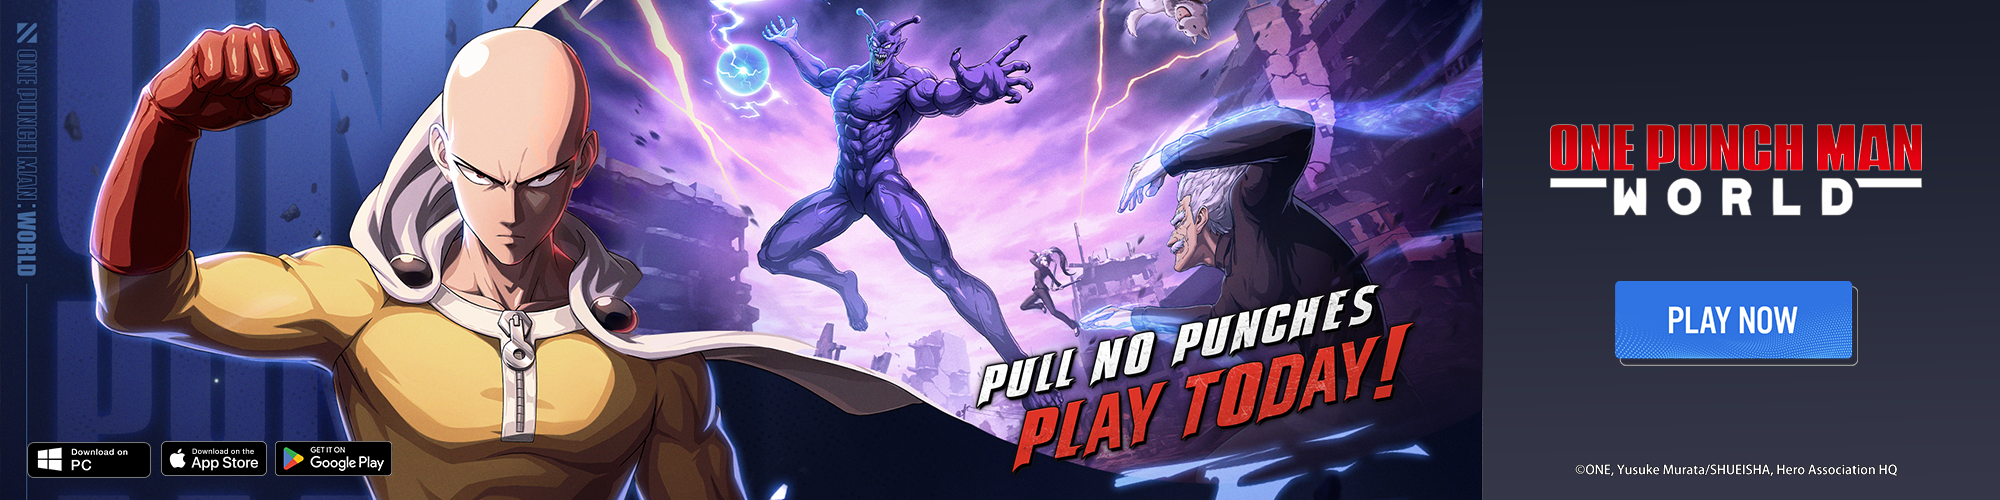  One Punch Man: World | Pull No Punches - Play Today!